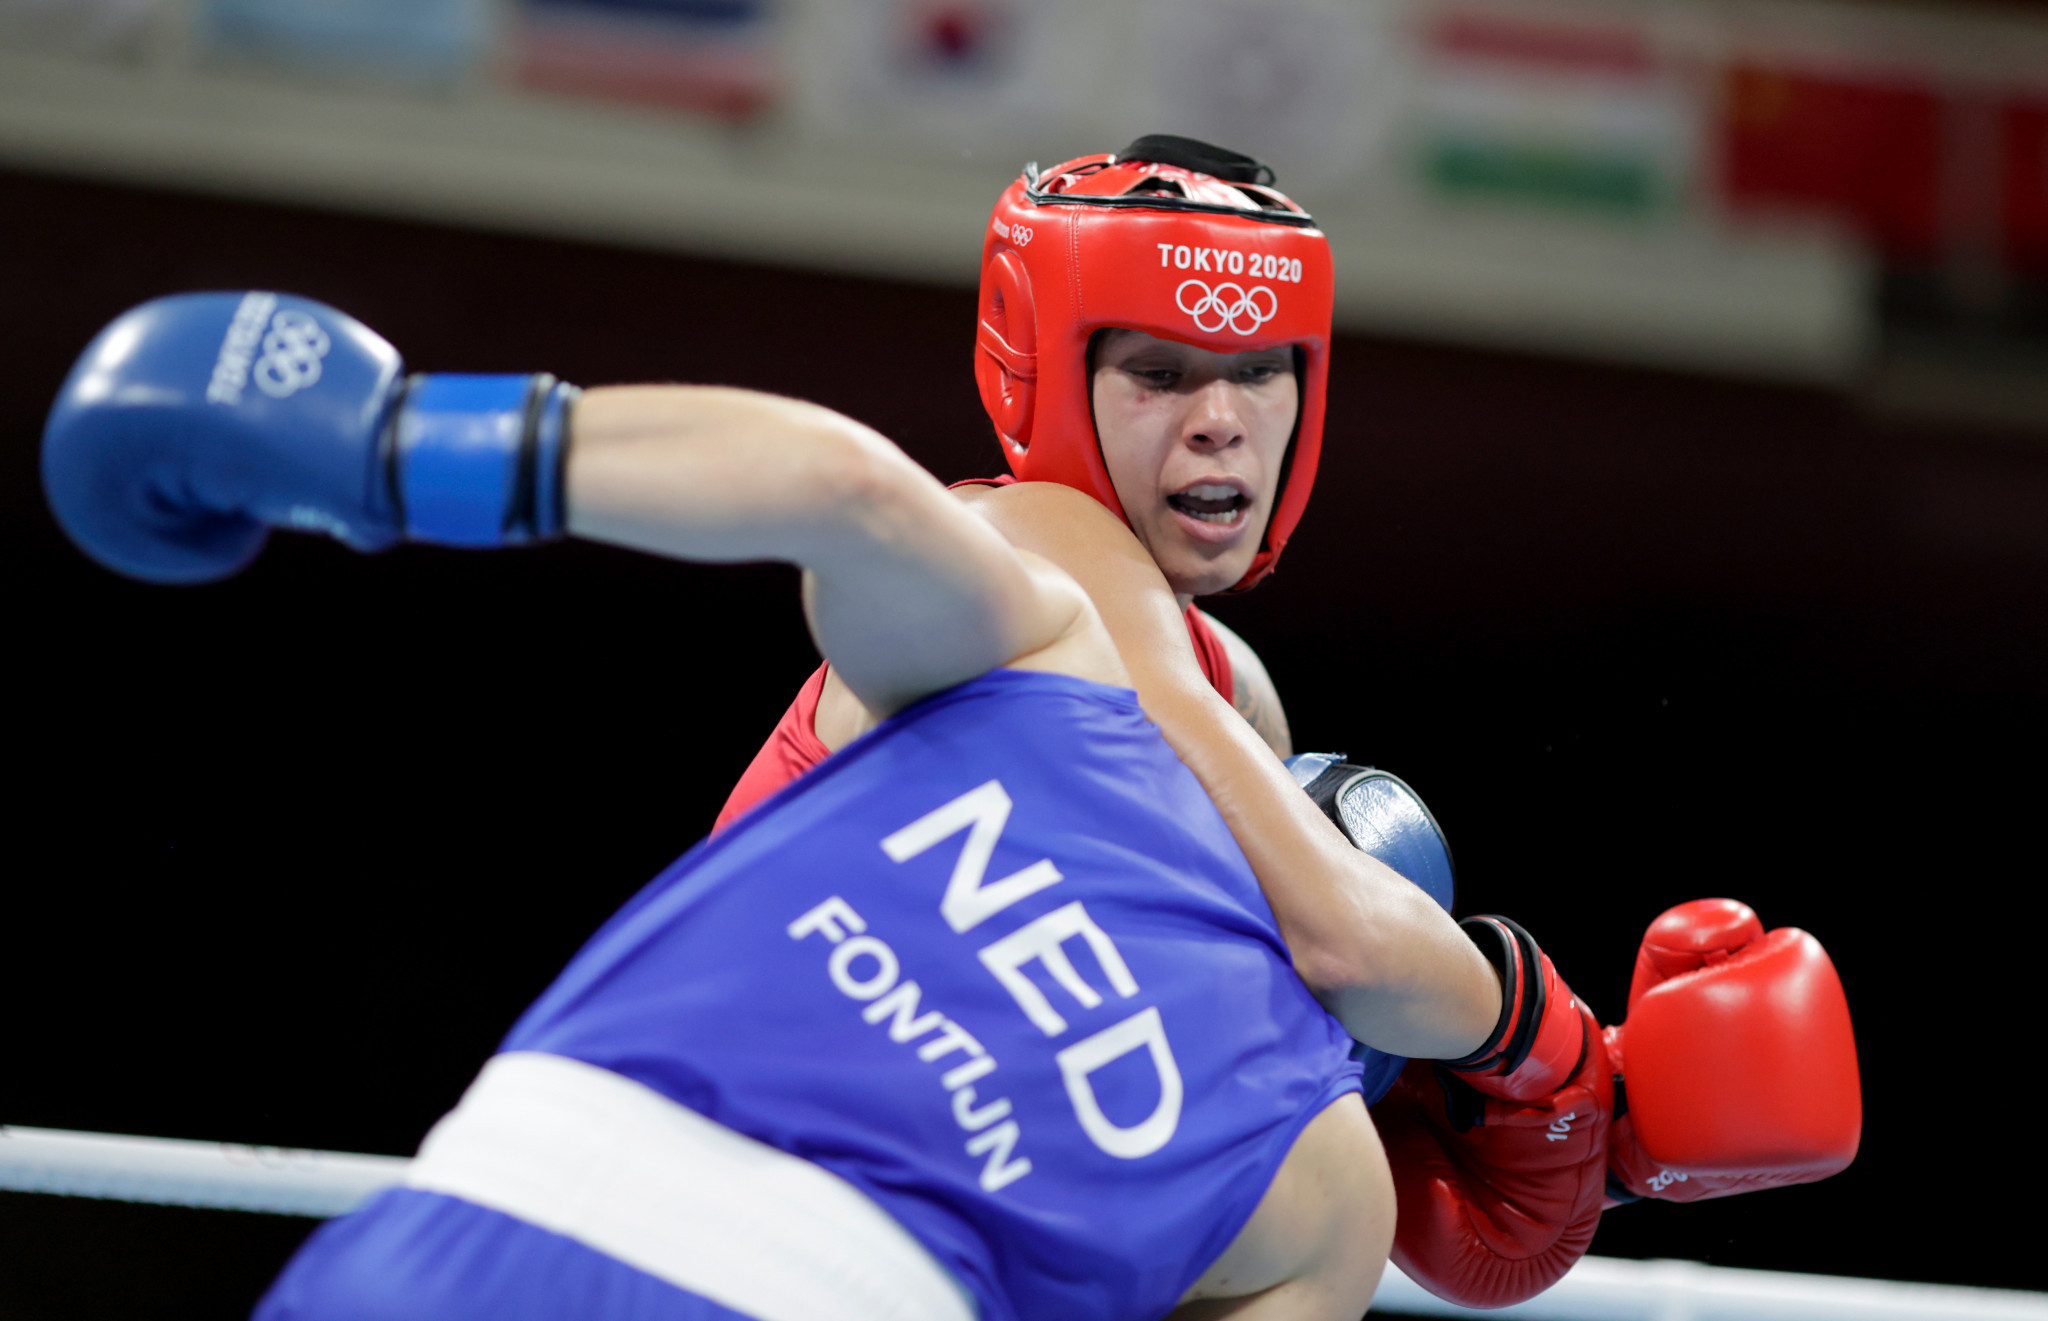 The Netherlands is among the National Federations suspended by the IBA for ties to World Boxing ©Getty Images